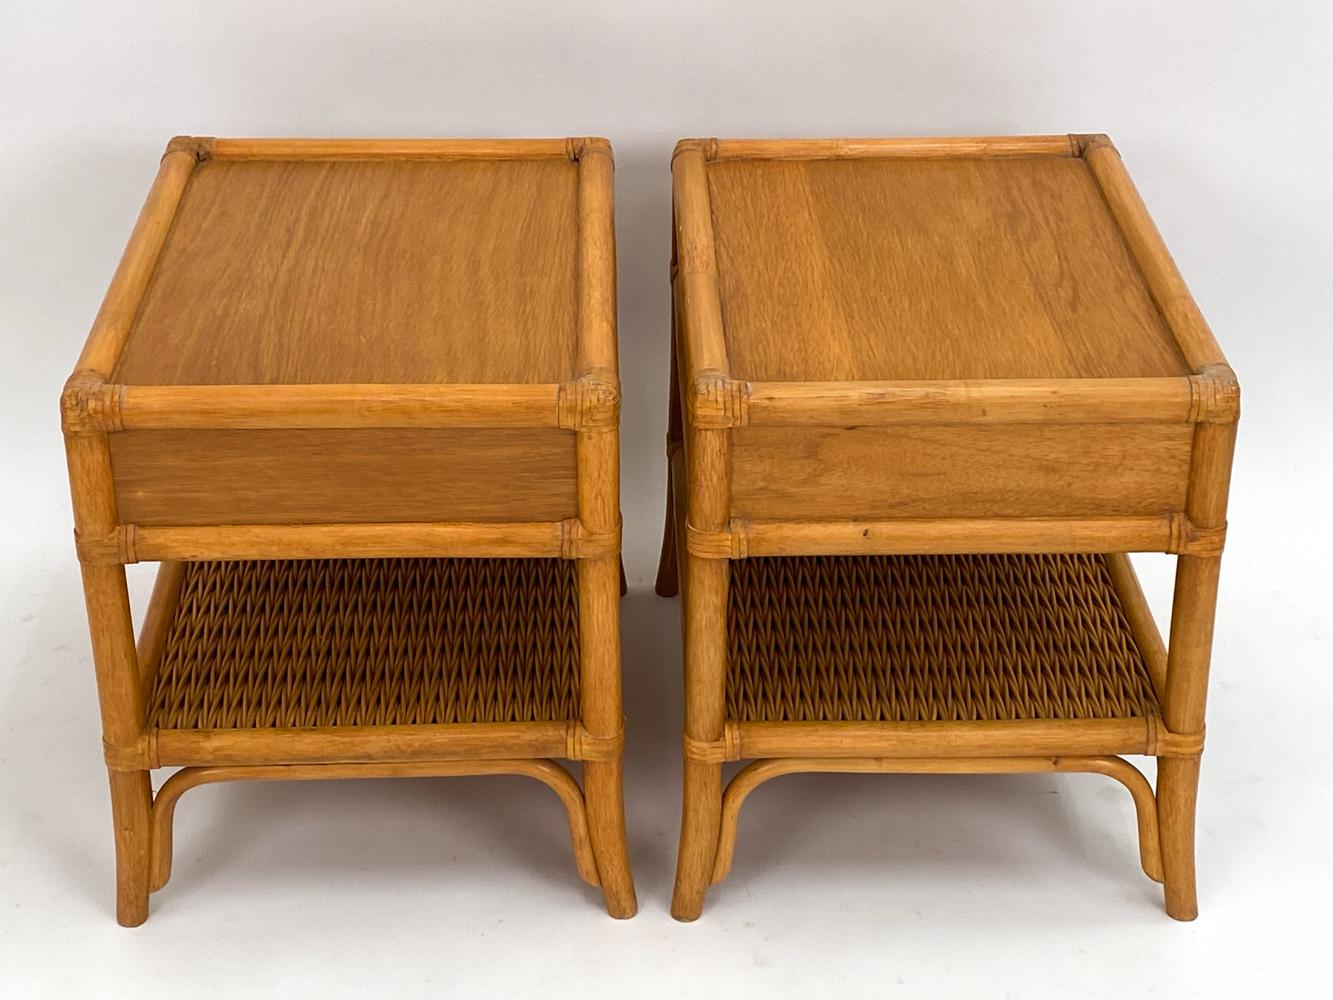 Pair of DUX Swedish Mid-Century Bamboo End Tables or Nightstands For Sale 5